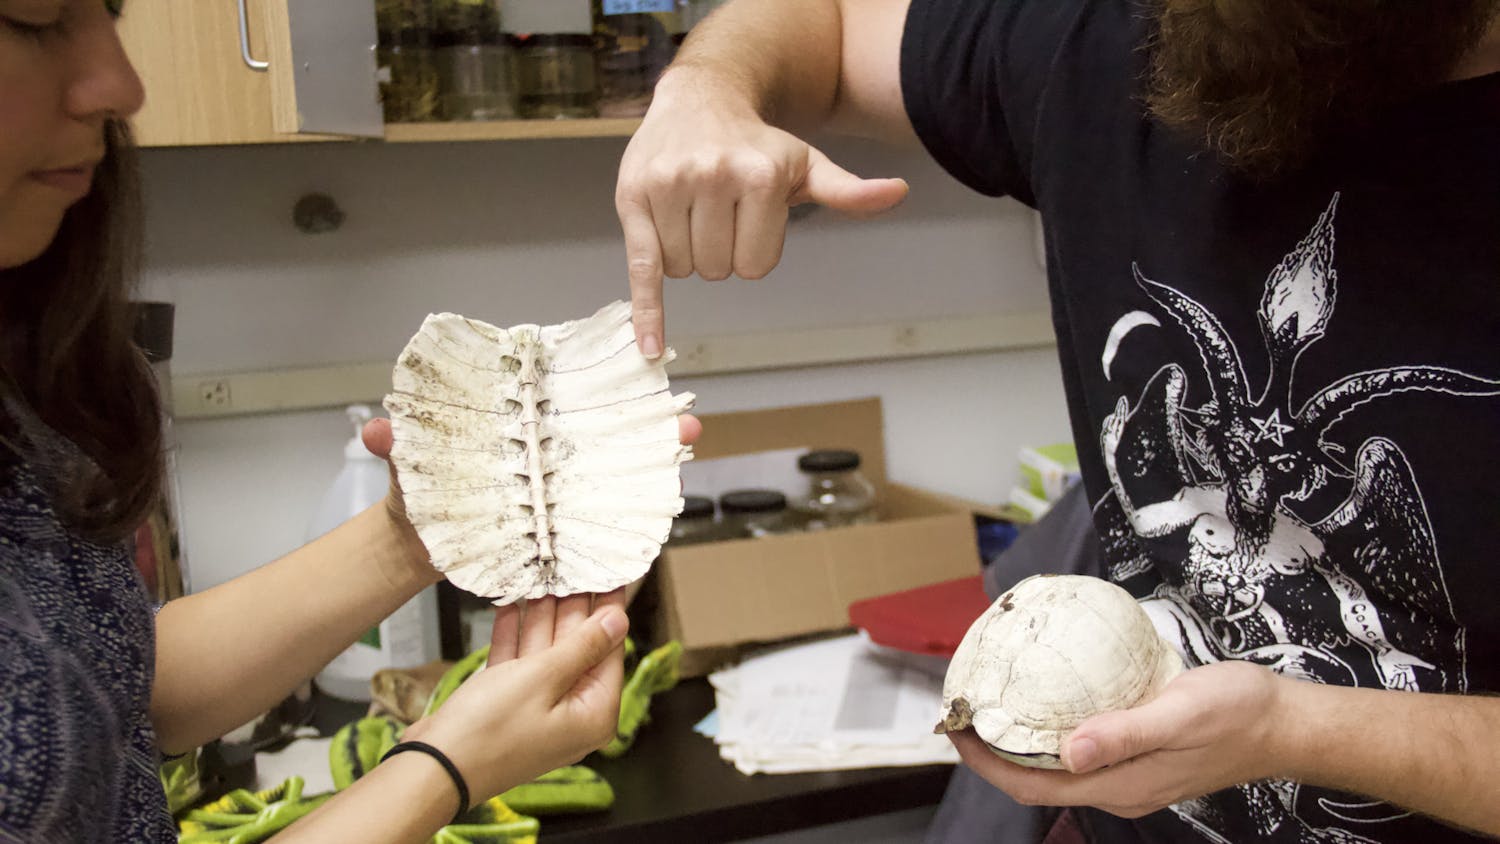 Sarah McGrath-Blaser (left) holds a Florida softshell turtle shell while Arik Hartmann (right) points to it, showing how the vertebrae is fused with the shell, at UF's Longo Lab on Wednesday, Oct. 27, 2021. "Turtles can't leave their shells because they are part of the skeleton," Hartmann said.